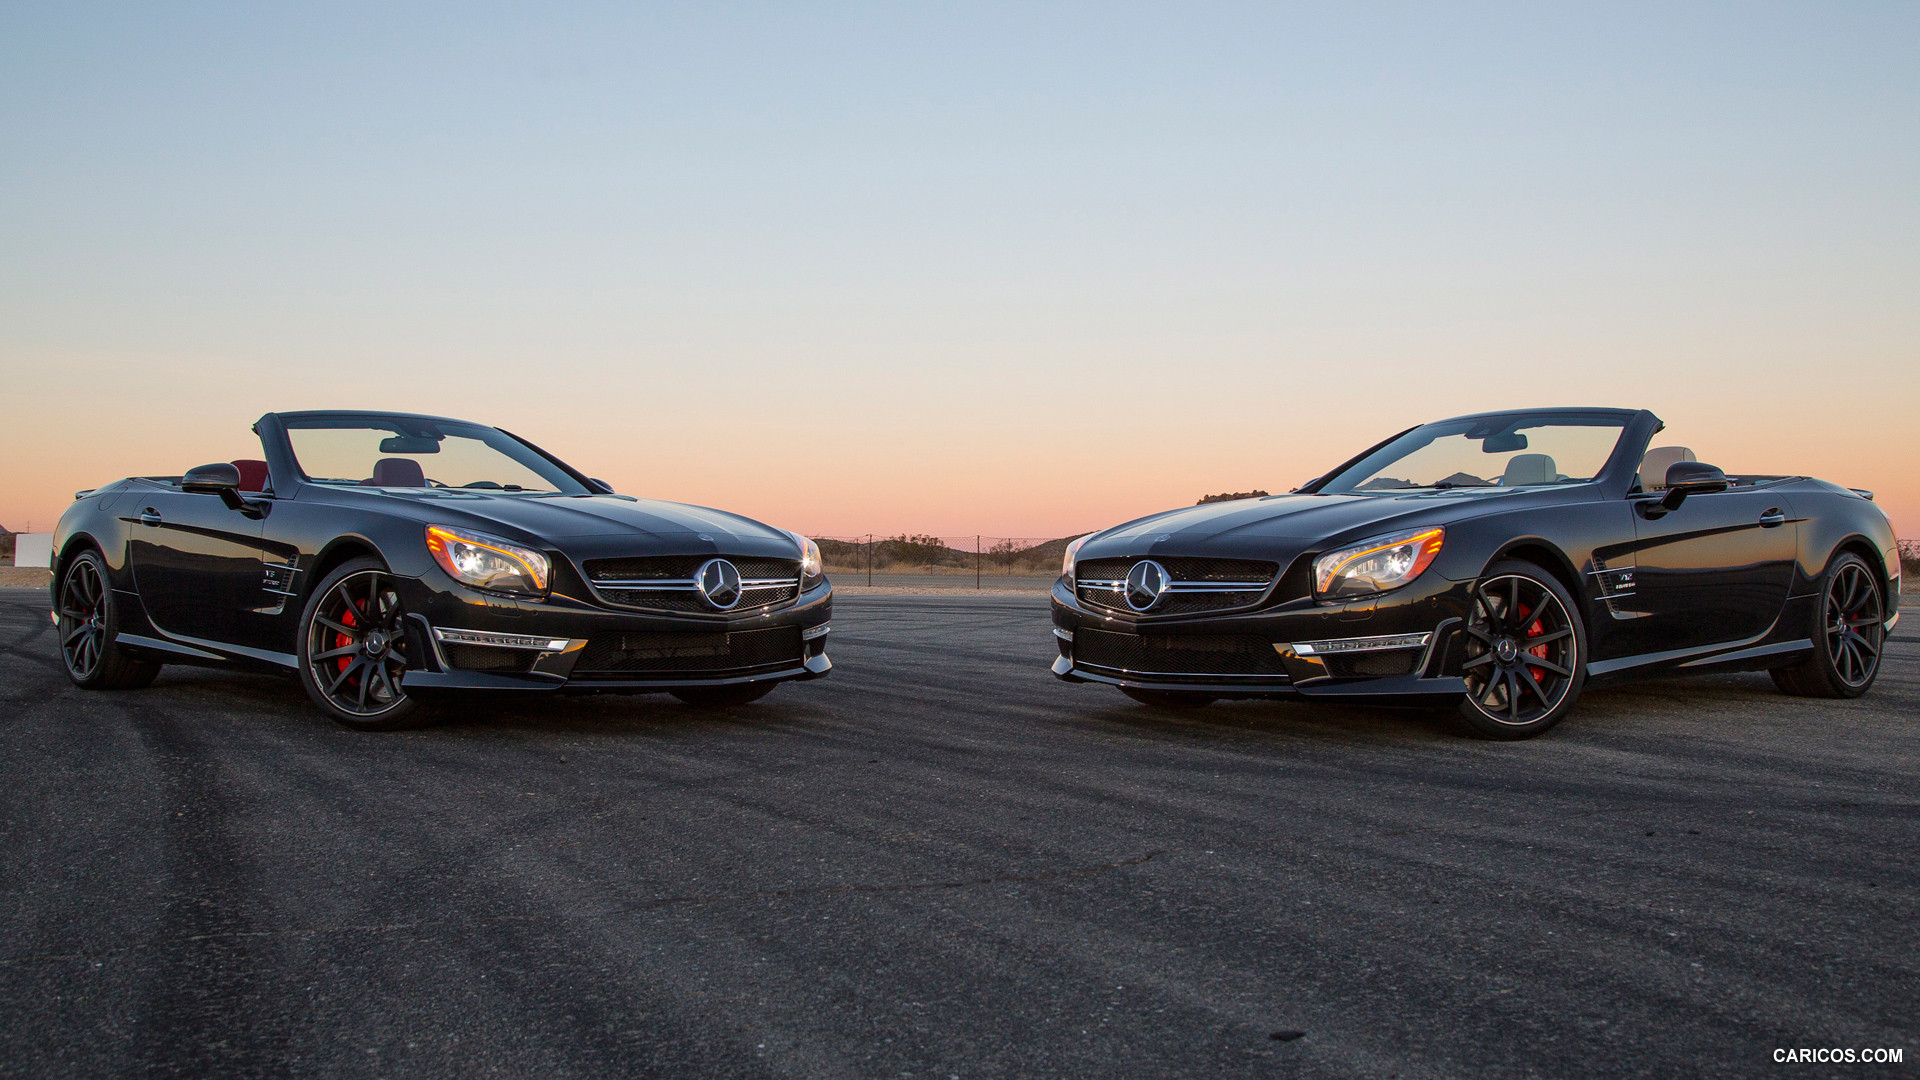 Mercedes-Benz SL63 AMG (2013) Duo - Front, #98 of 111